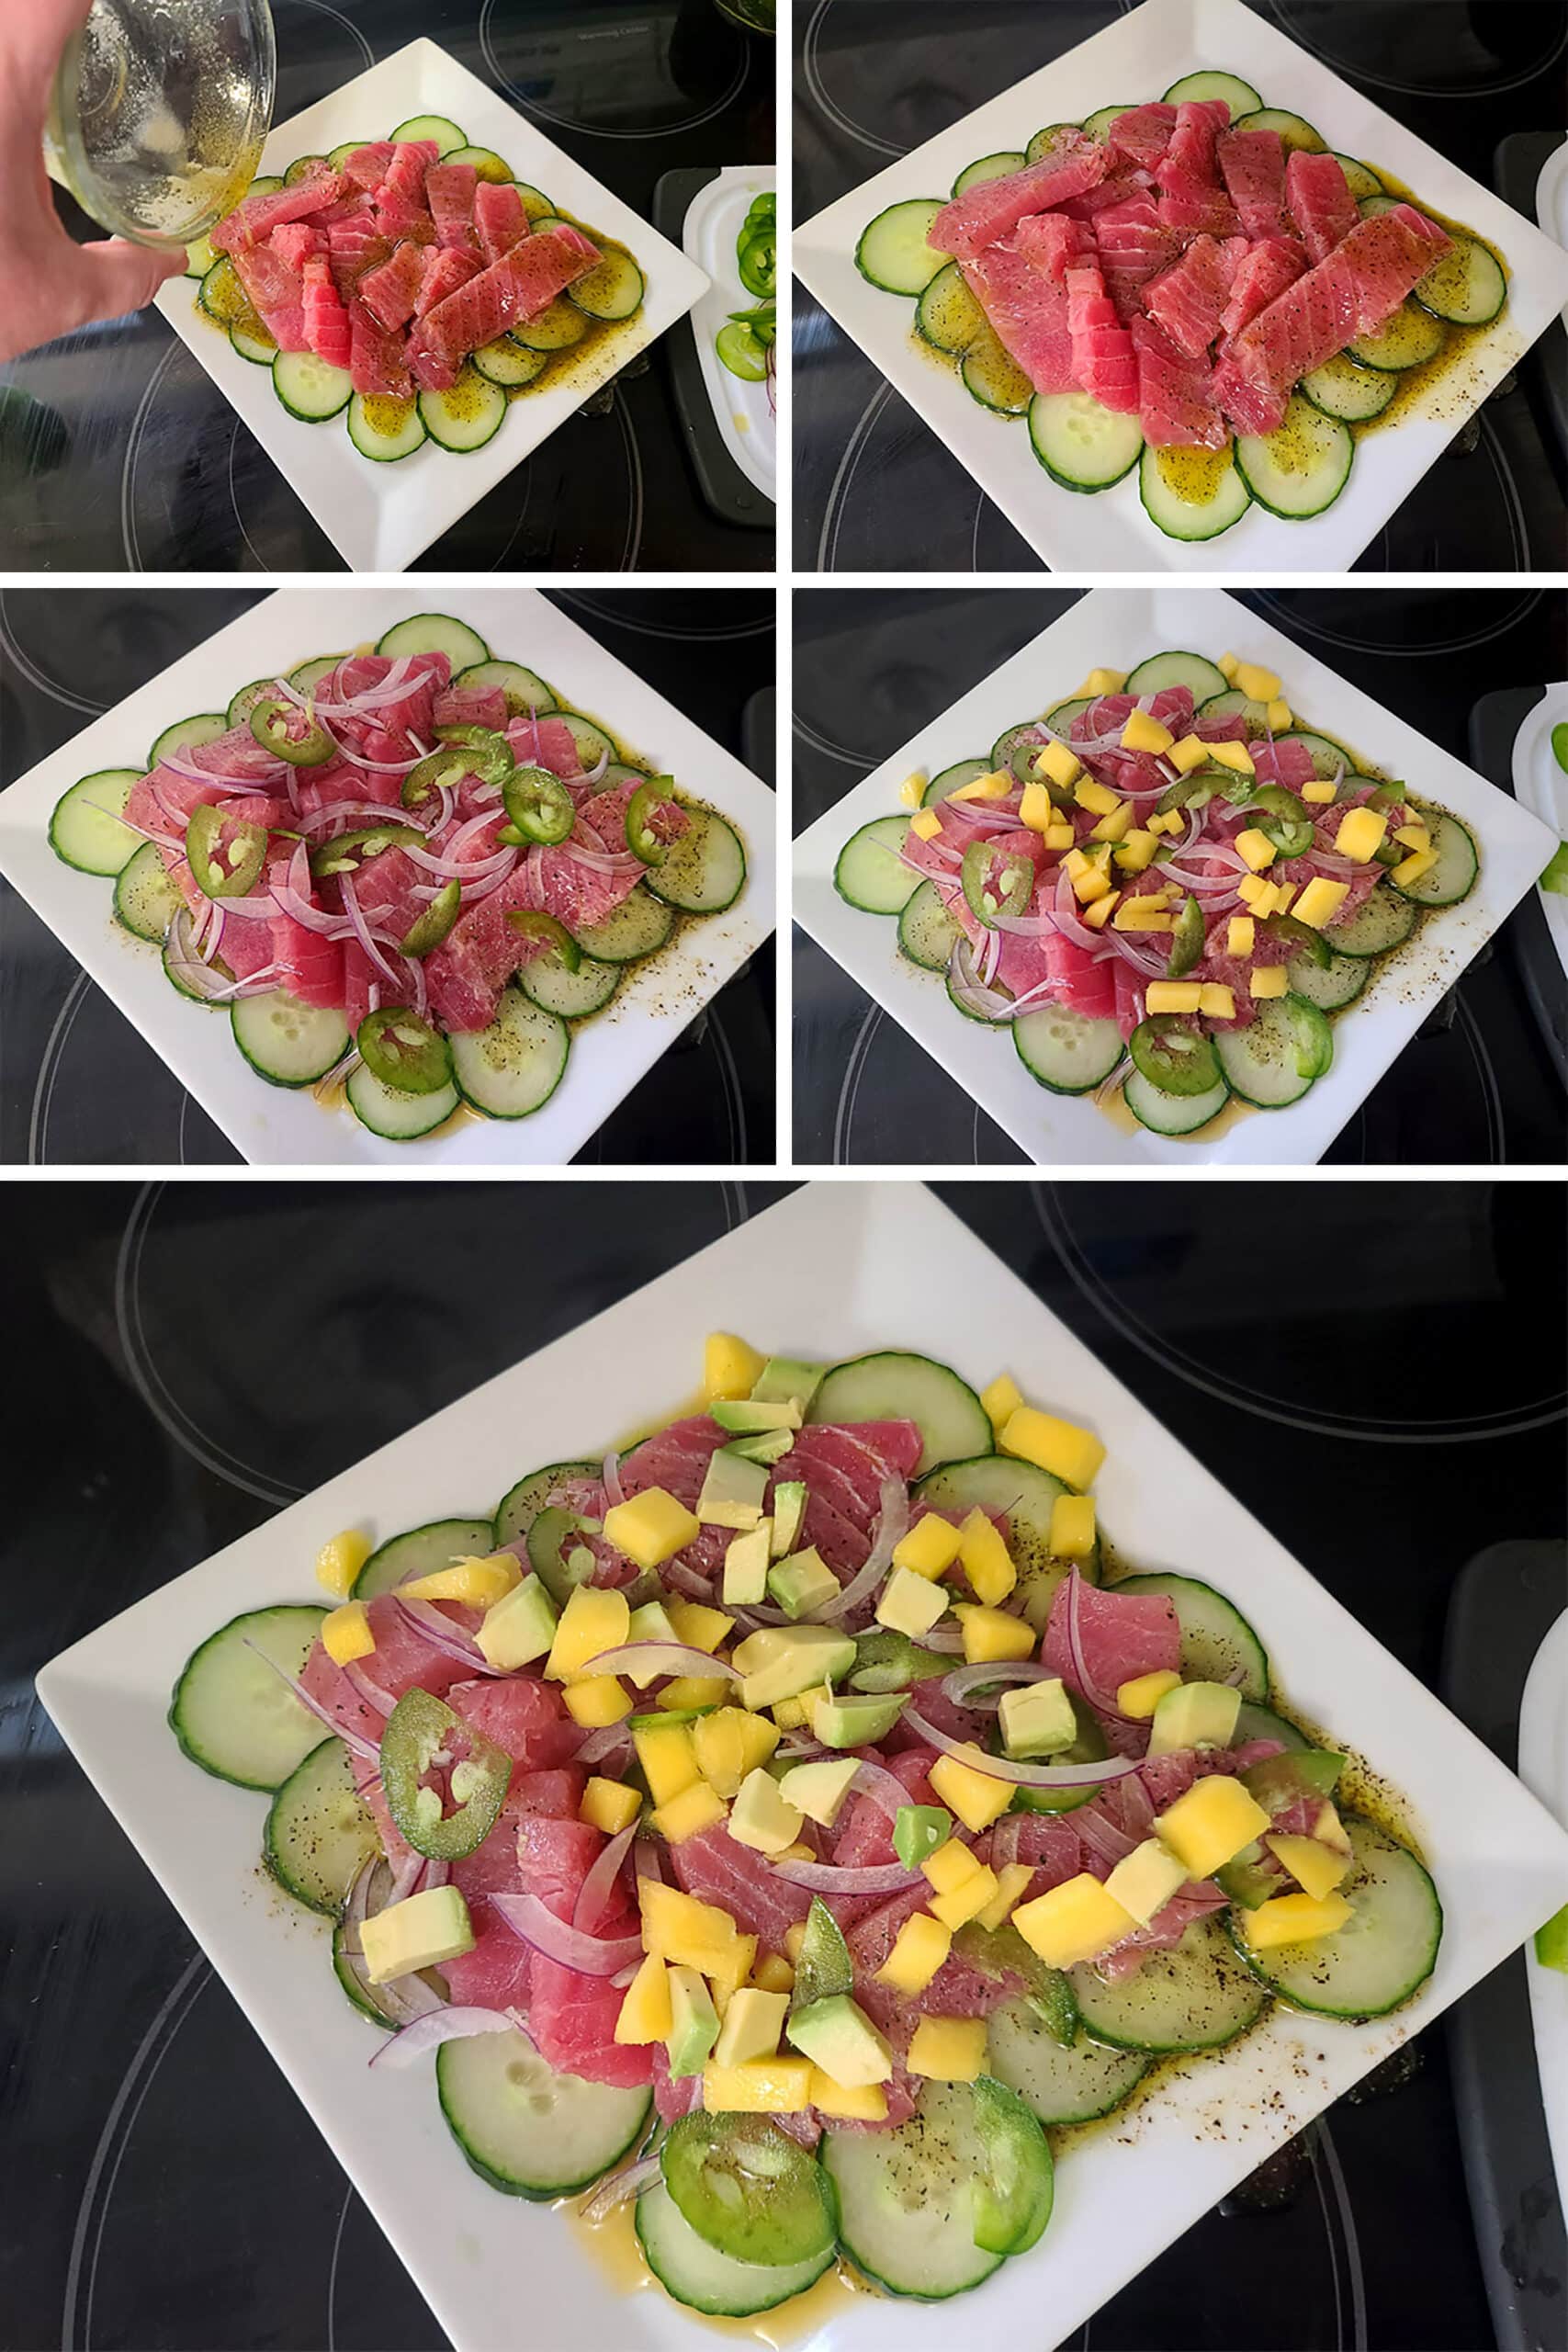 A 5 part image showing the tuna, toppings, and vinaigrette being layered on the cucumber slices.